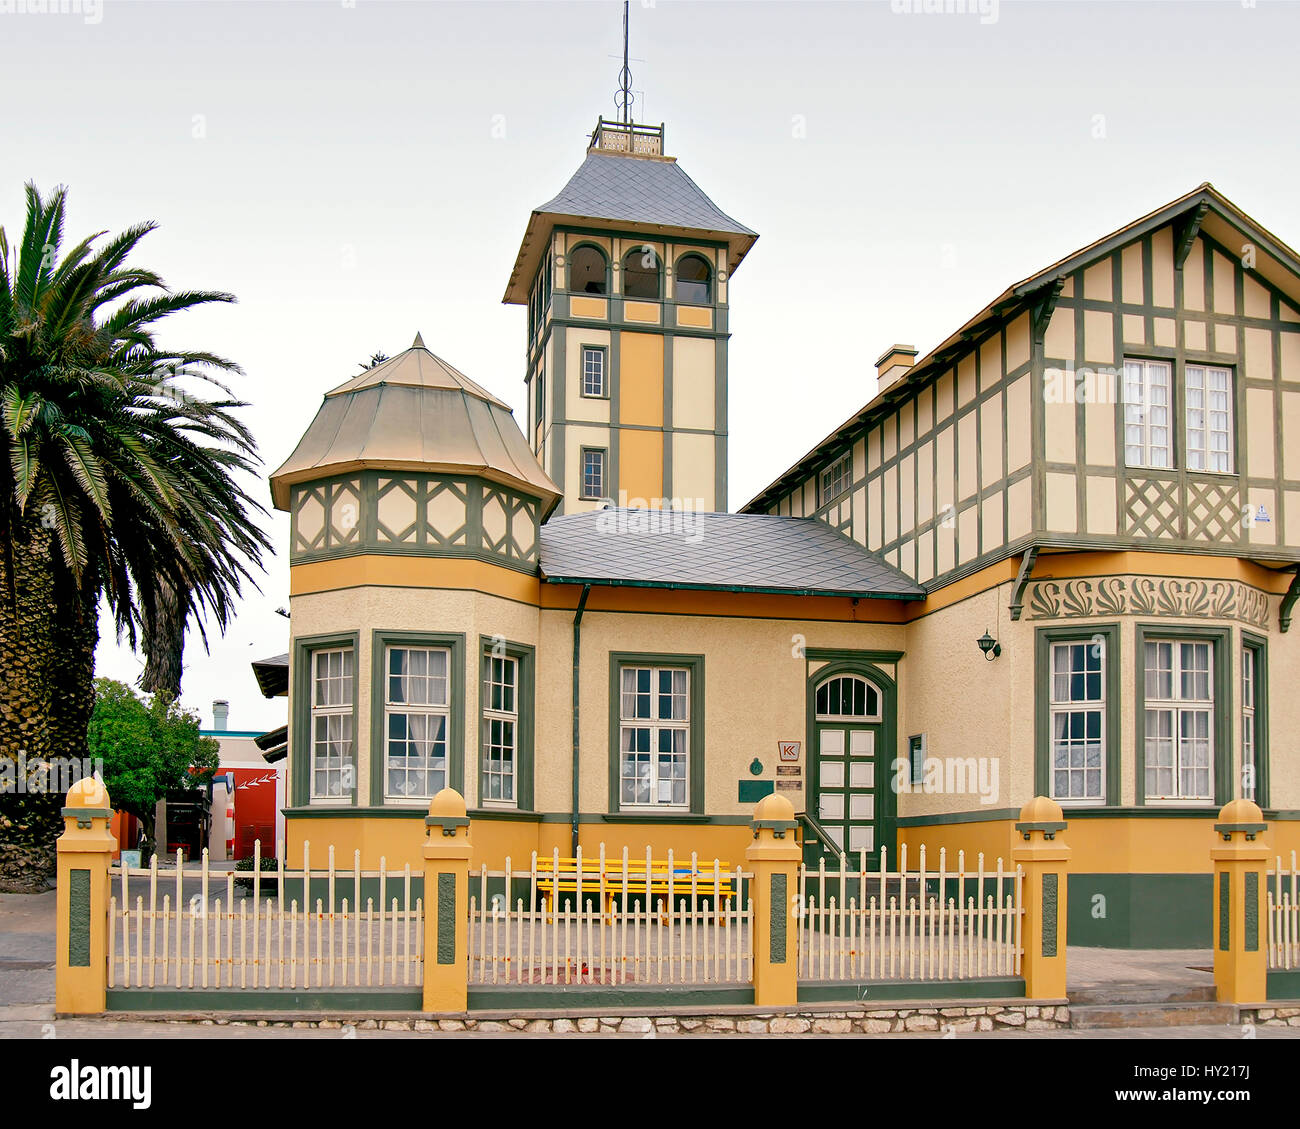 Stock Photo of Colonial German Building in Swakopmund, Namibia. Stock Photo